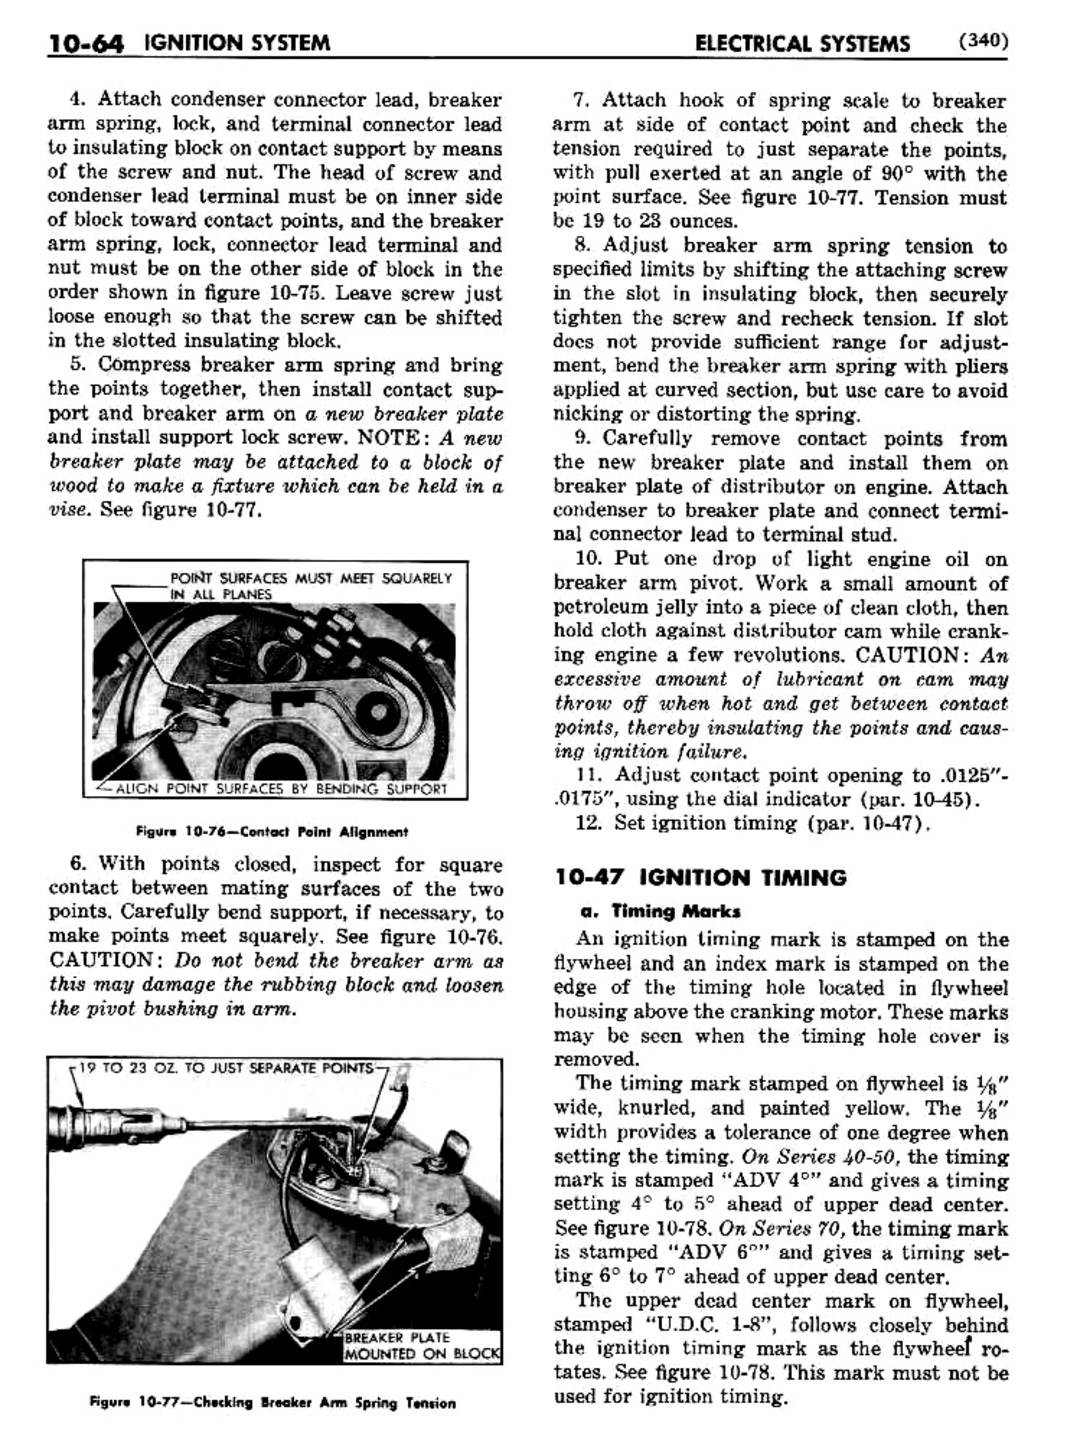 n_11 1948 Buick Shop Manual - Electrical Systems-064-064.jpg